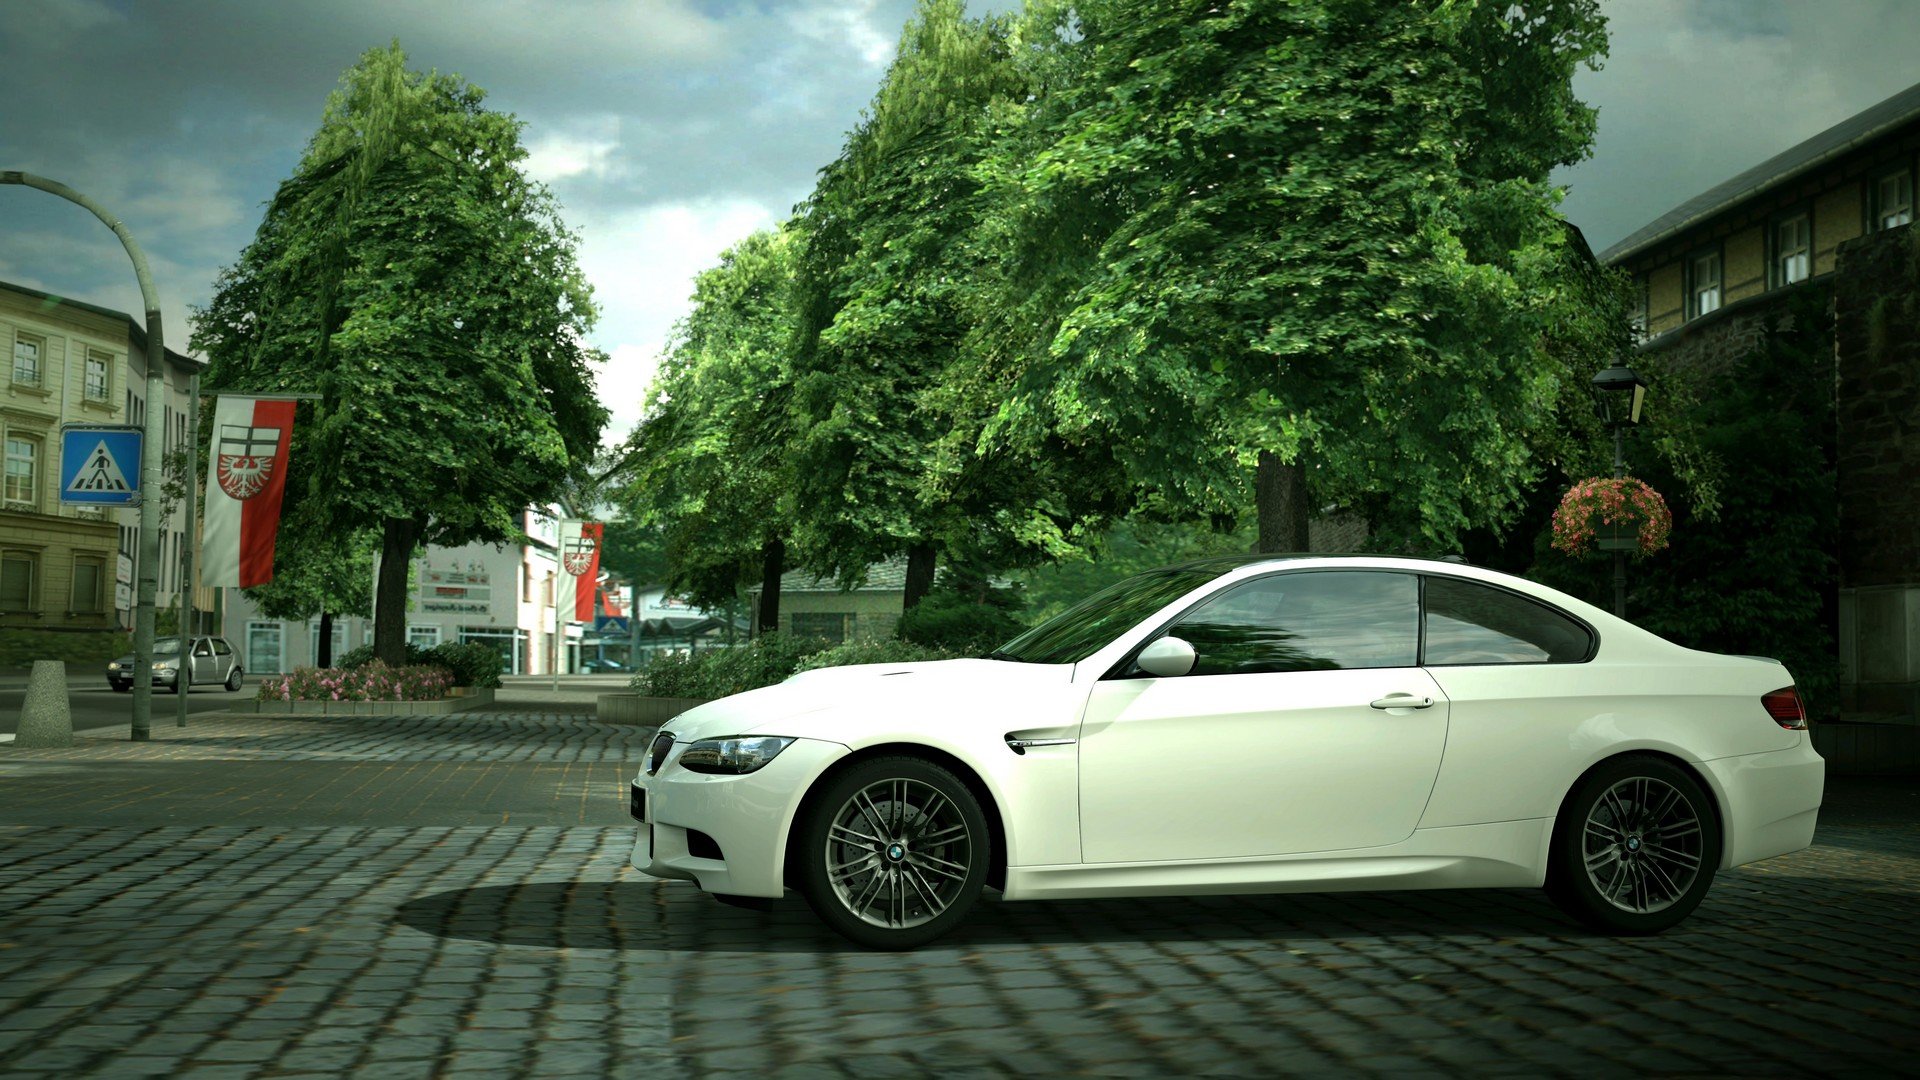 Download full hd 1920x1080 Gran Turismo 5 PC background ID:73650 for free